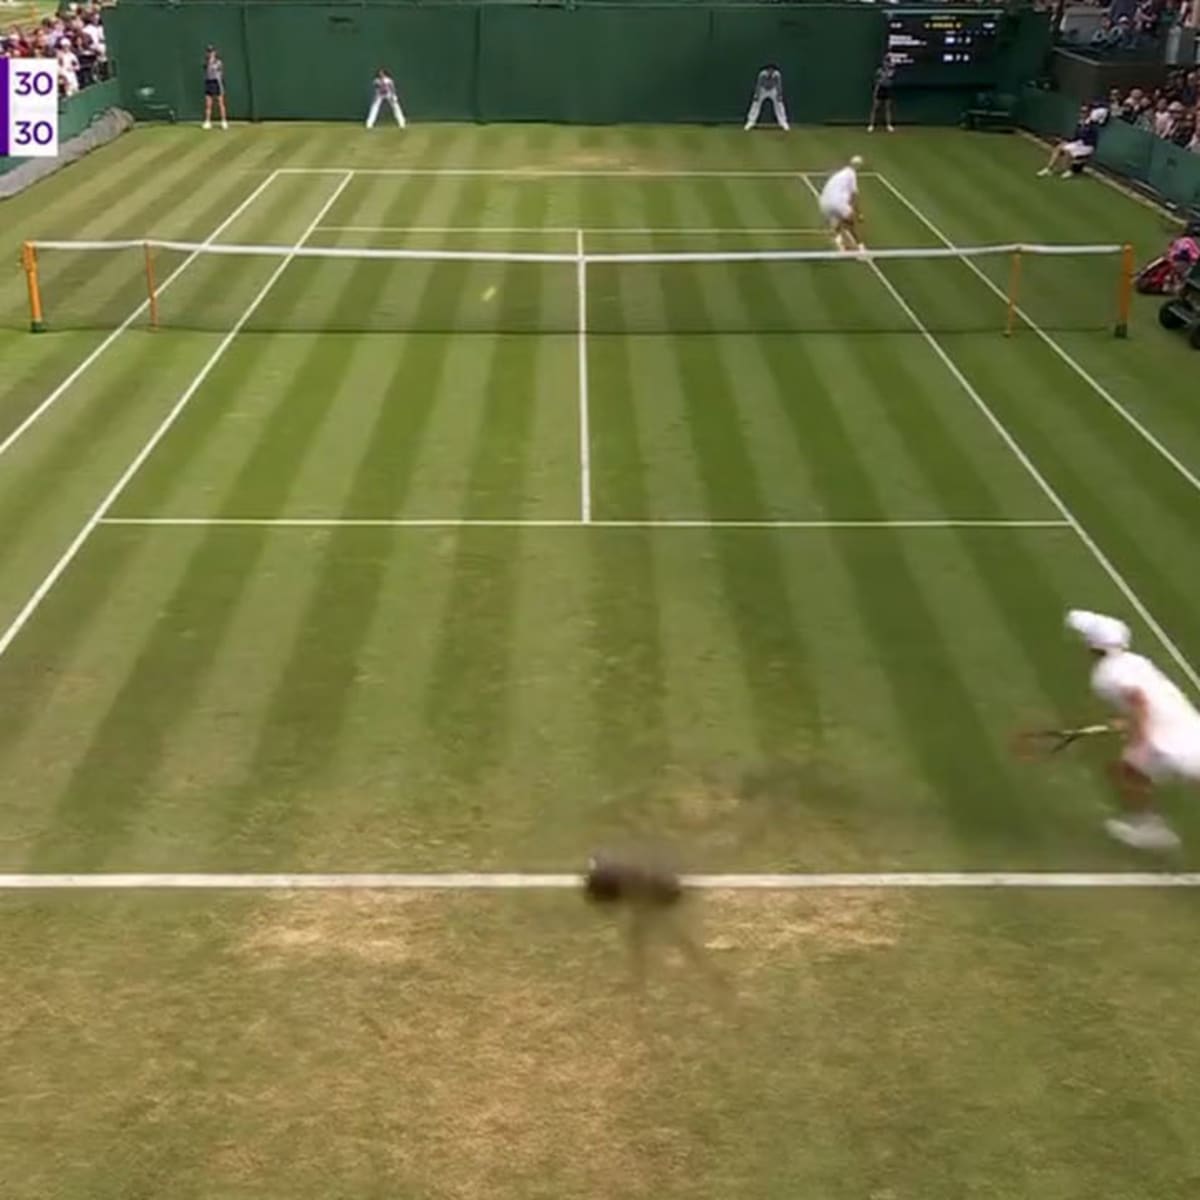 ESPNs Wimbledon Coverage Interrupted by Spider Crawling on TV Camera